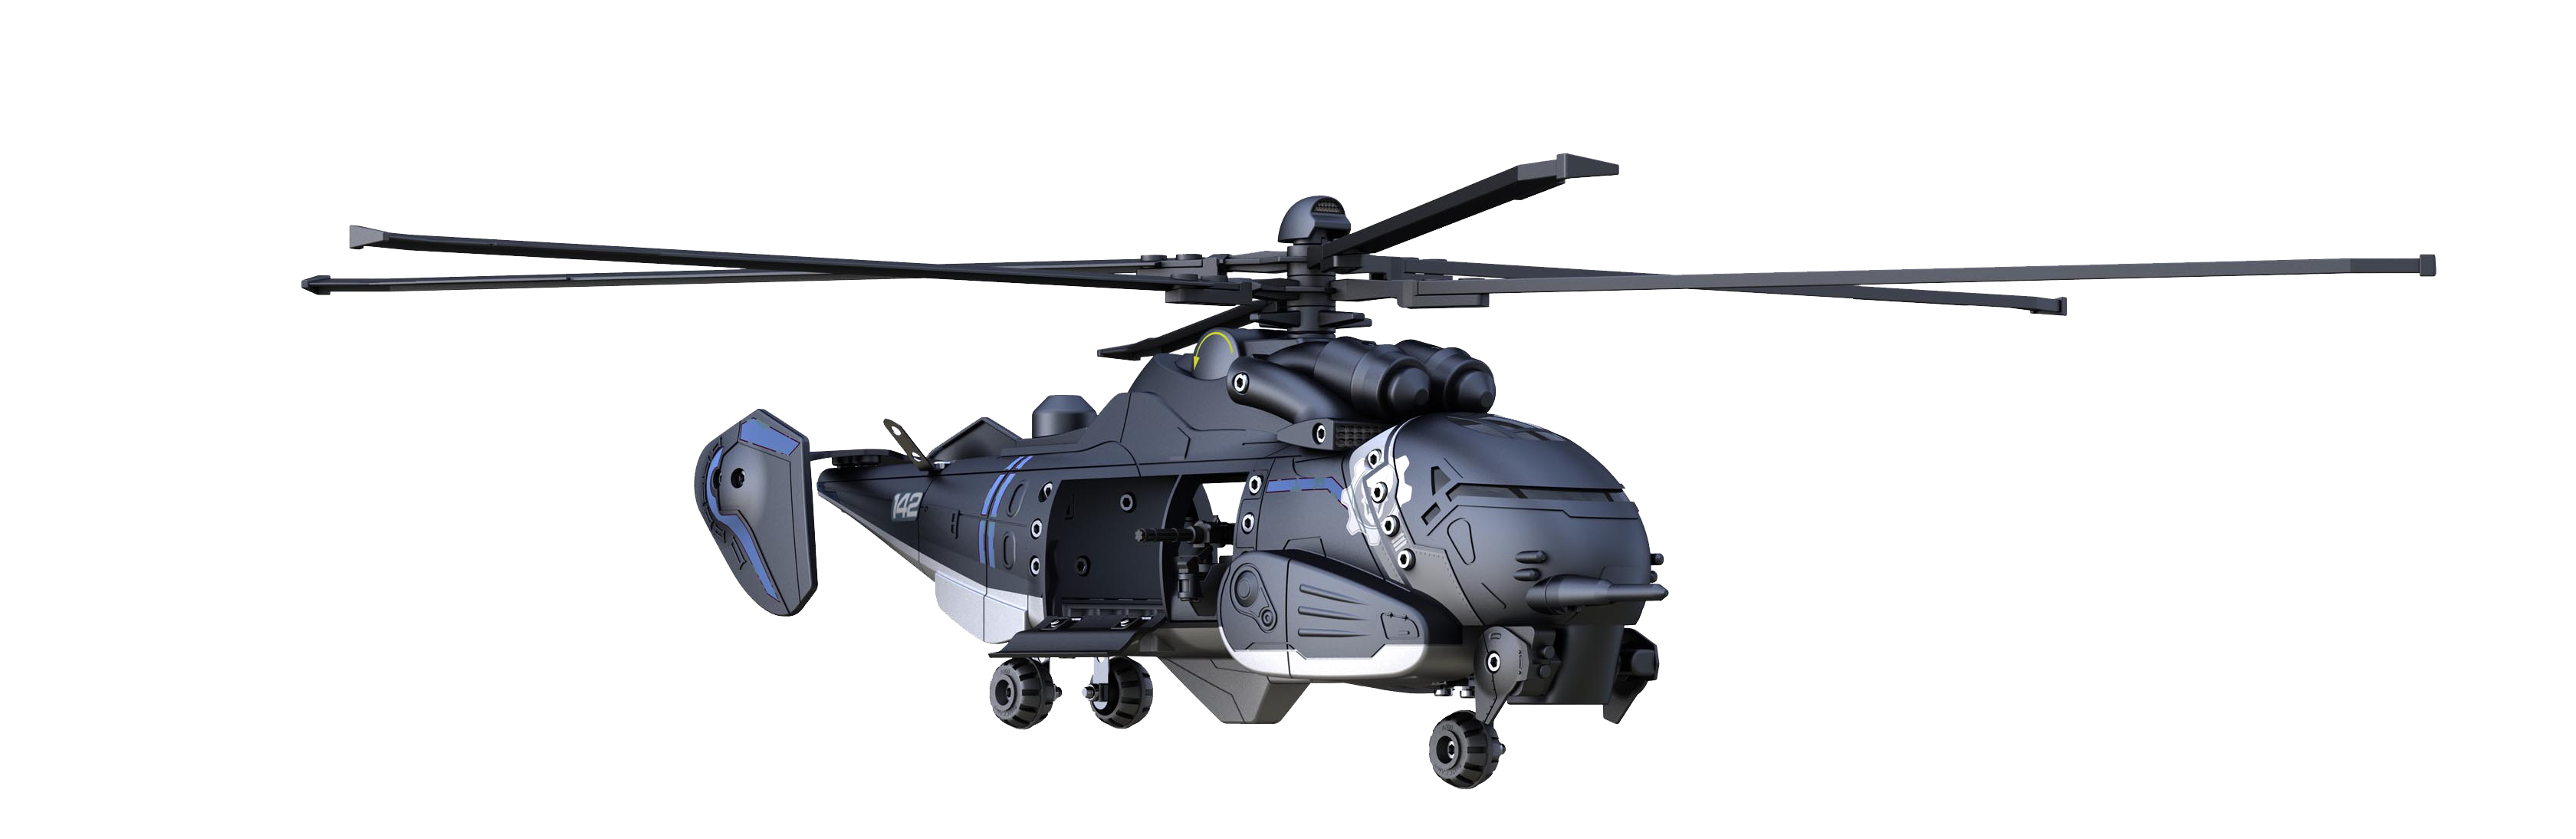 Army Helicopter PNG HD Image pngteam.com